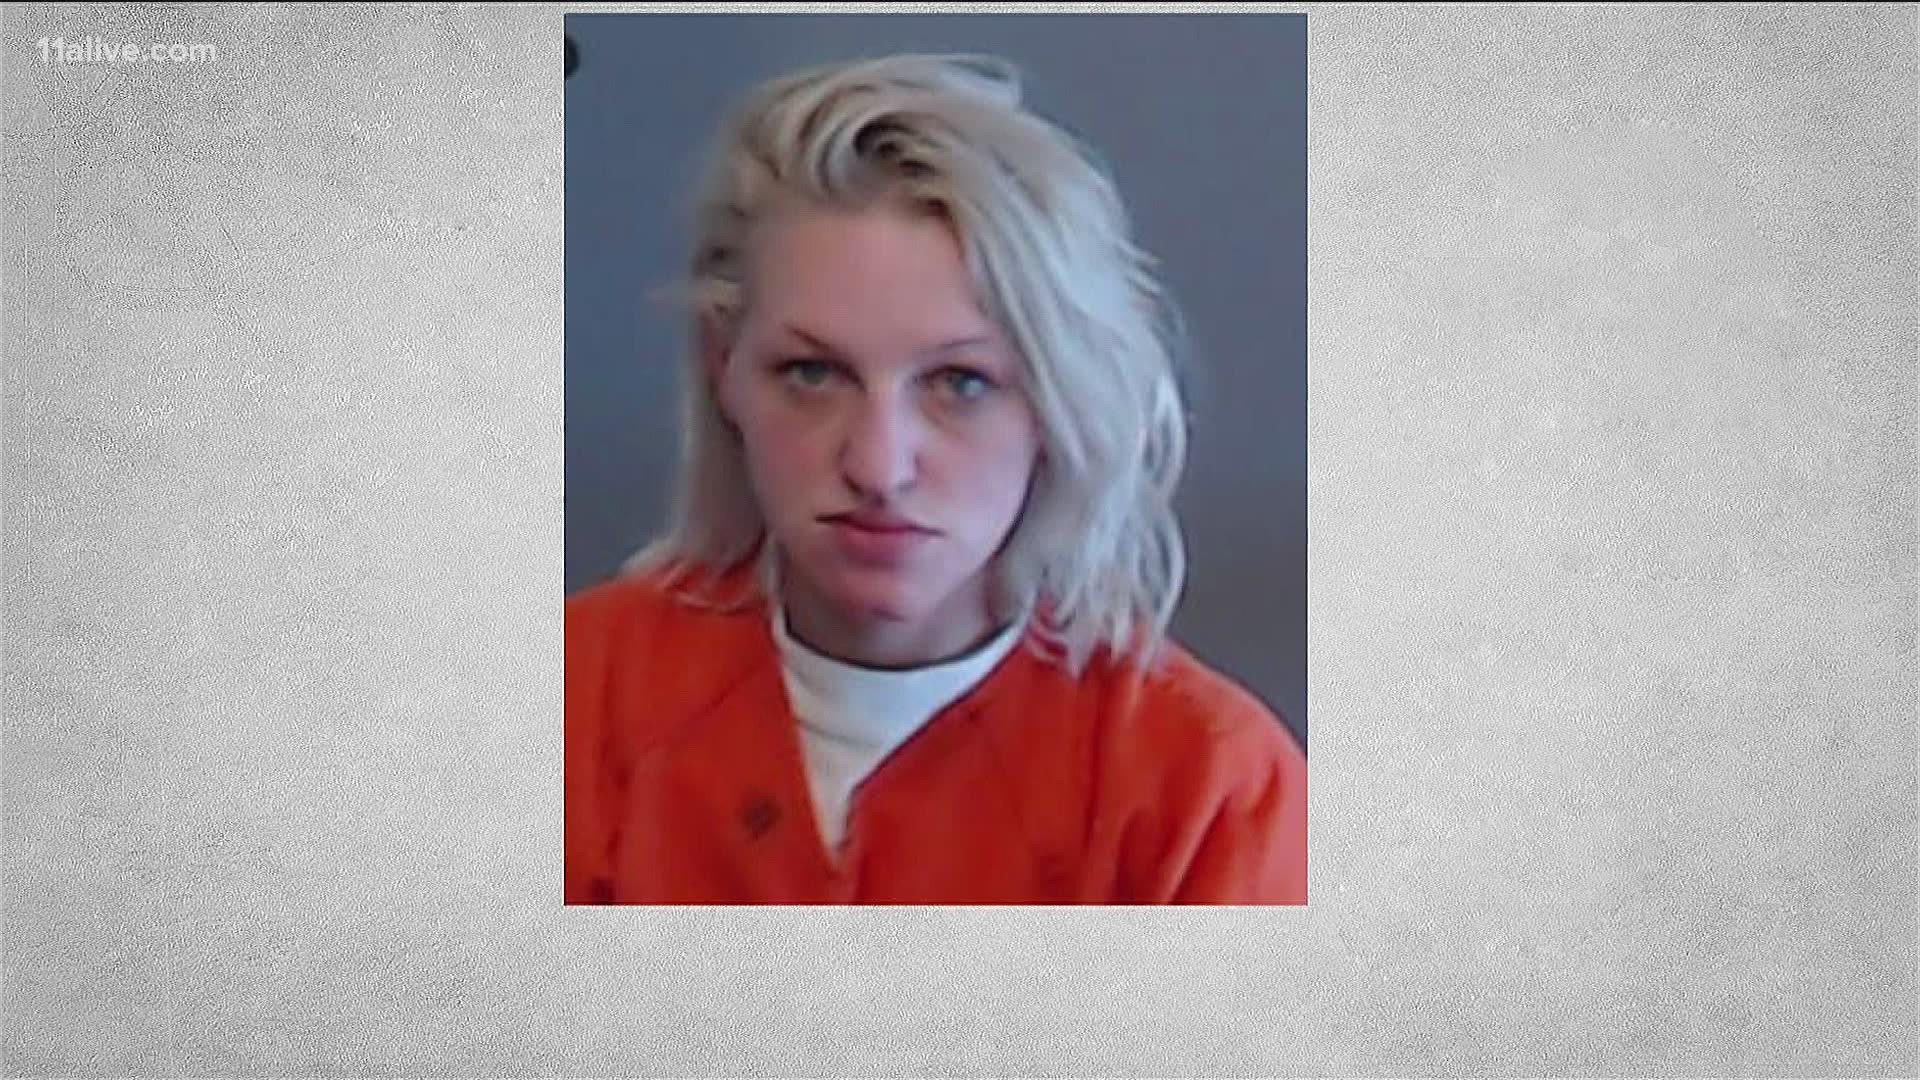 Morgan Nicole Vila, 28, is facing a host of charges connected to the alleged incident, including kidnapping, cruelty to children and hit-and-run.